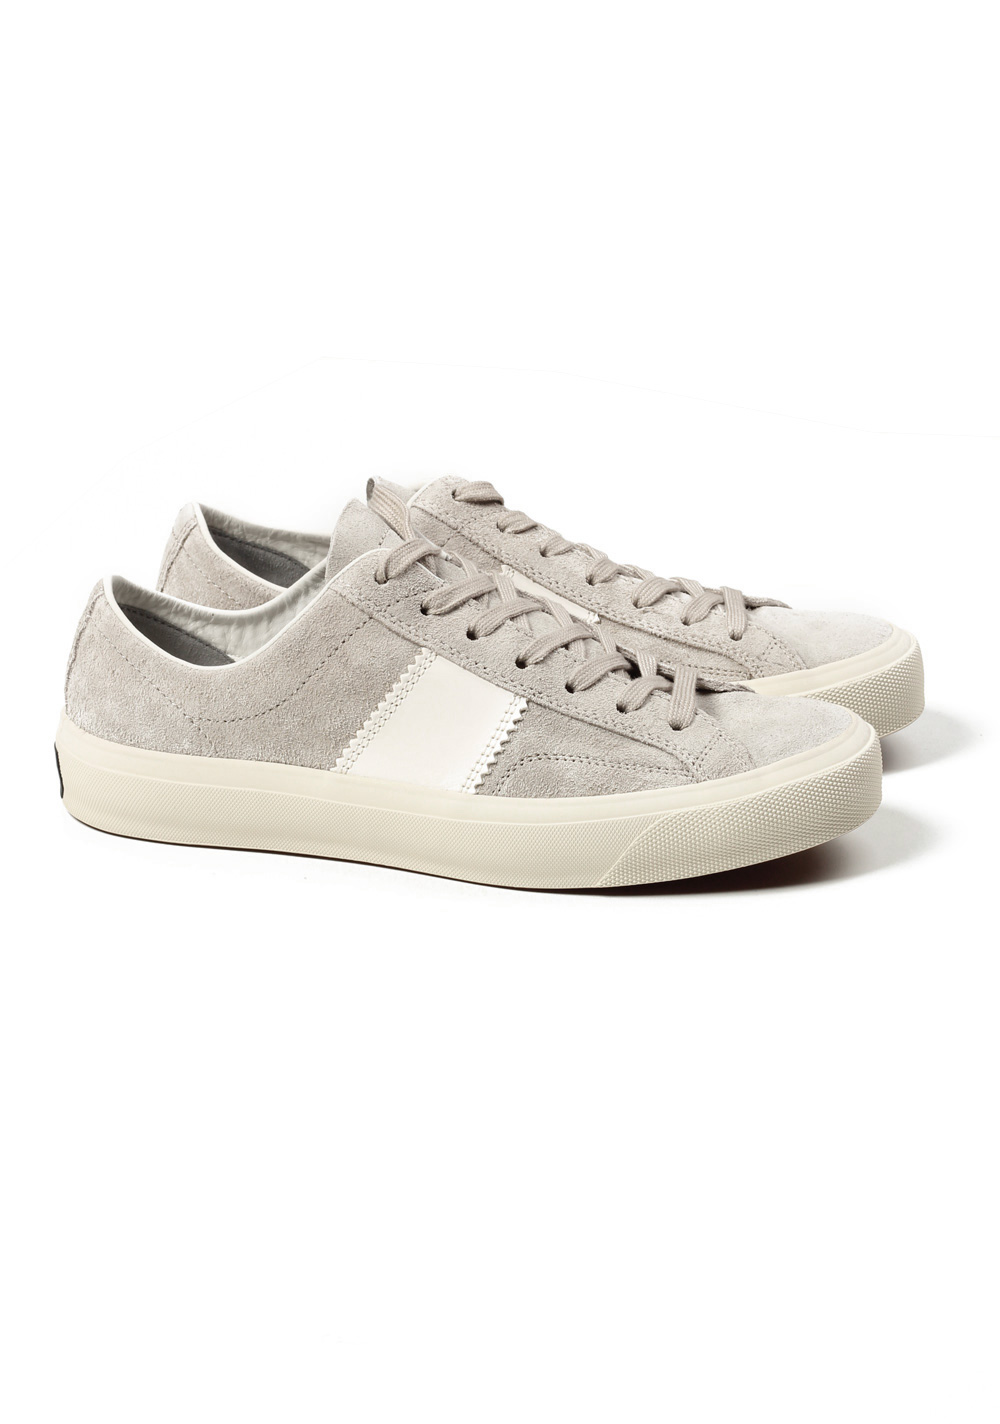 TOM FORD Cambridge Lace Up Gray Suede Sneaker Shoes Size 7,5 UK / 8,5 U.S. | Costume Limité